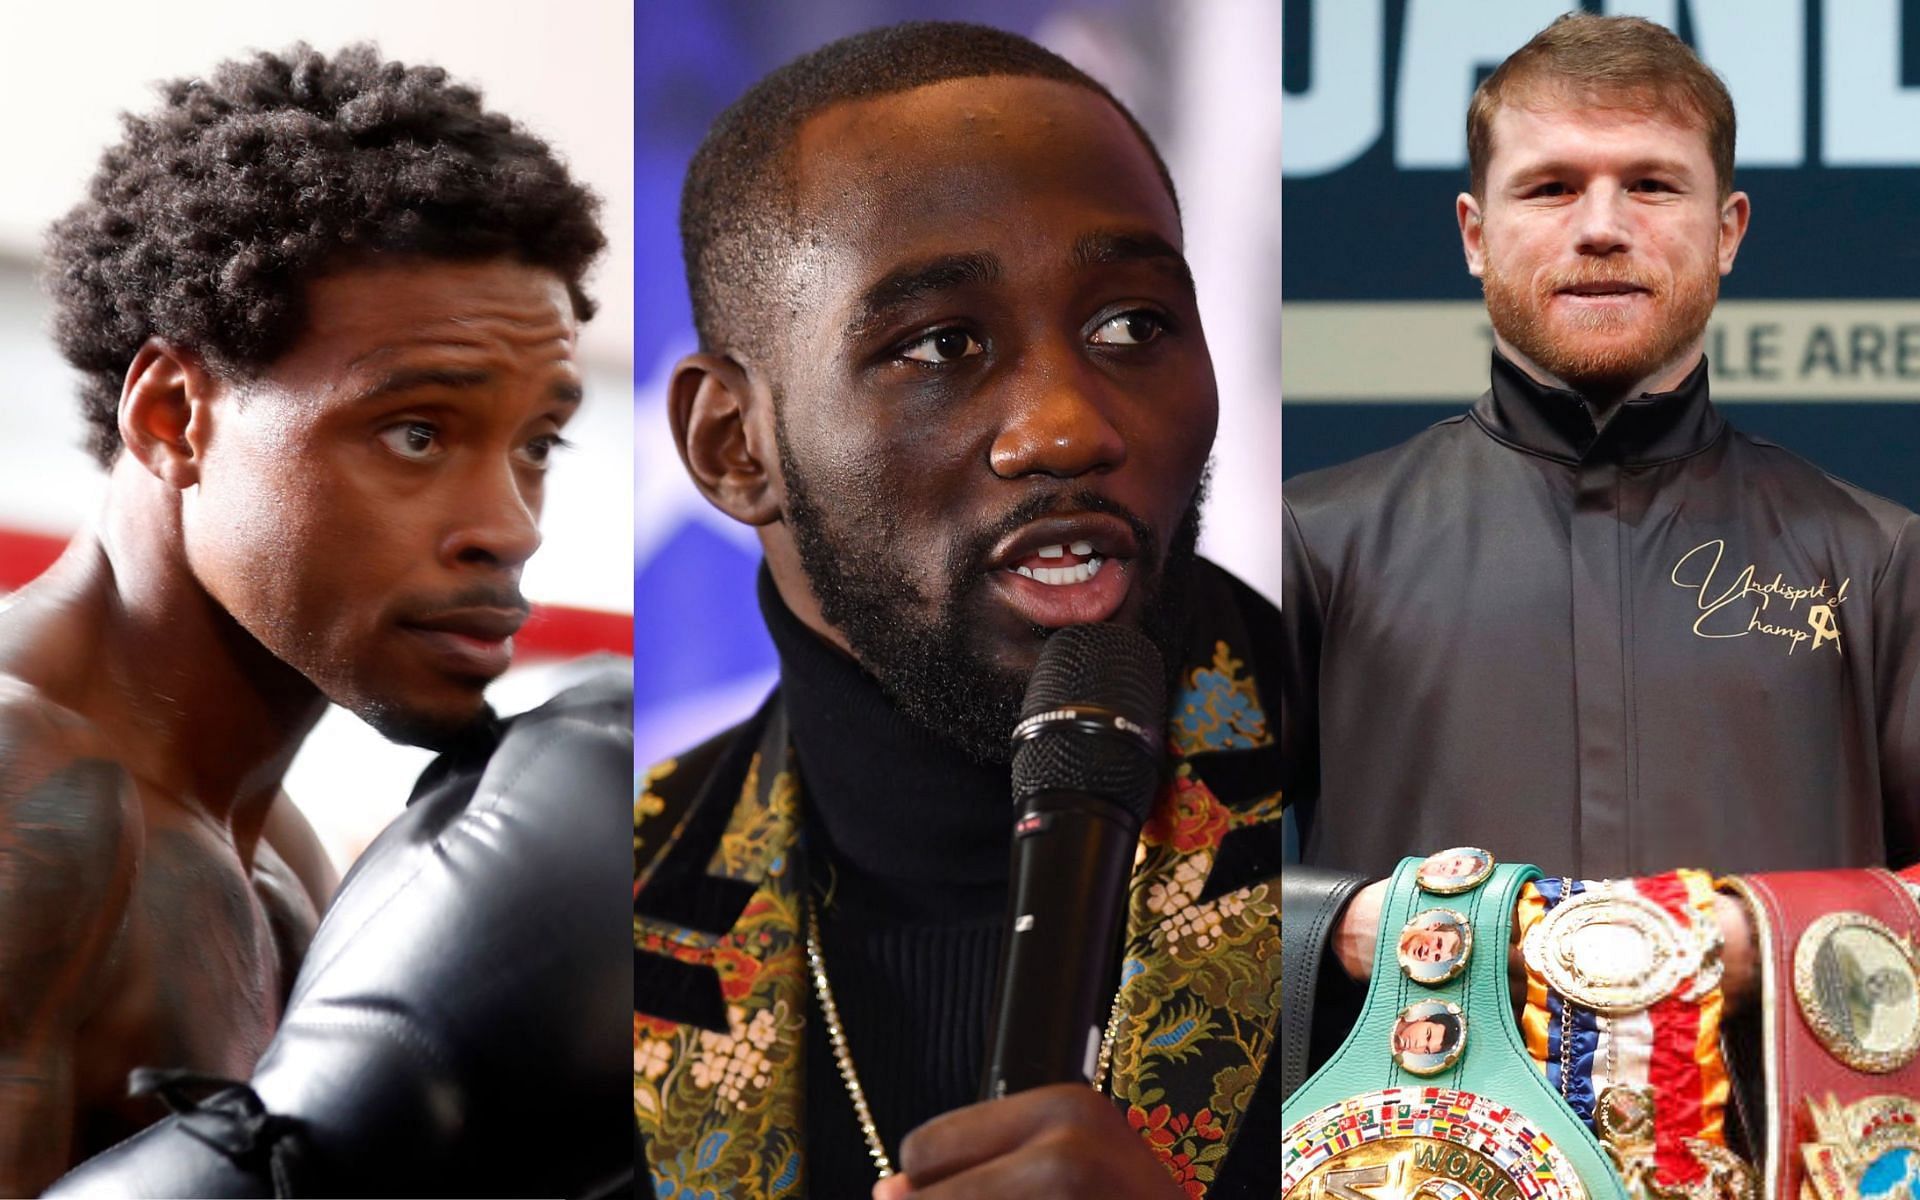 Errol Spence Jr. (left), Terence Crawford (middle) and Canelo Alvarez (right) [Images Courtesy: @GettyImages]